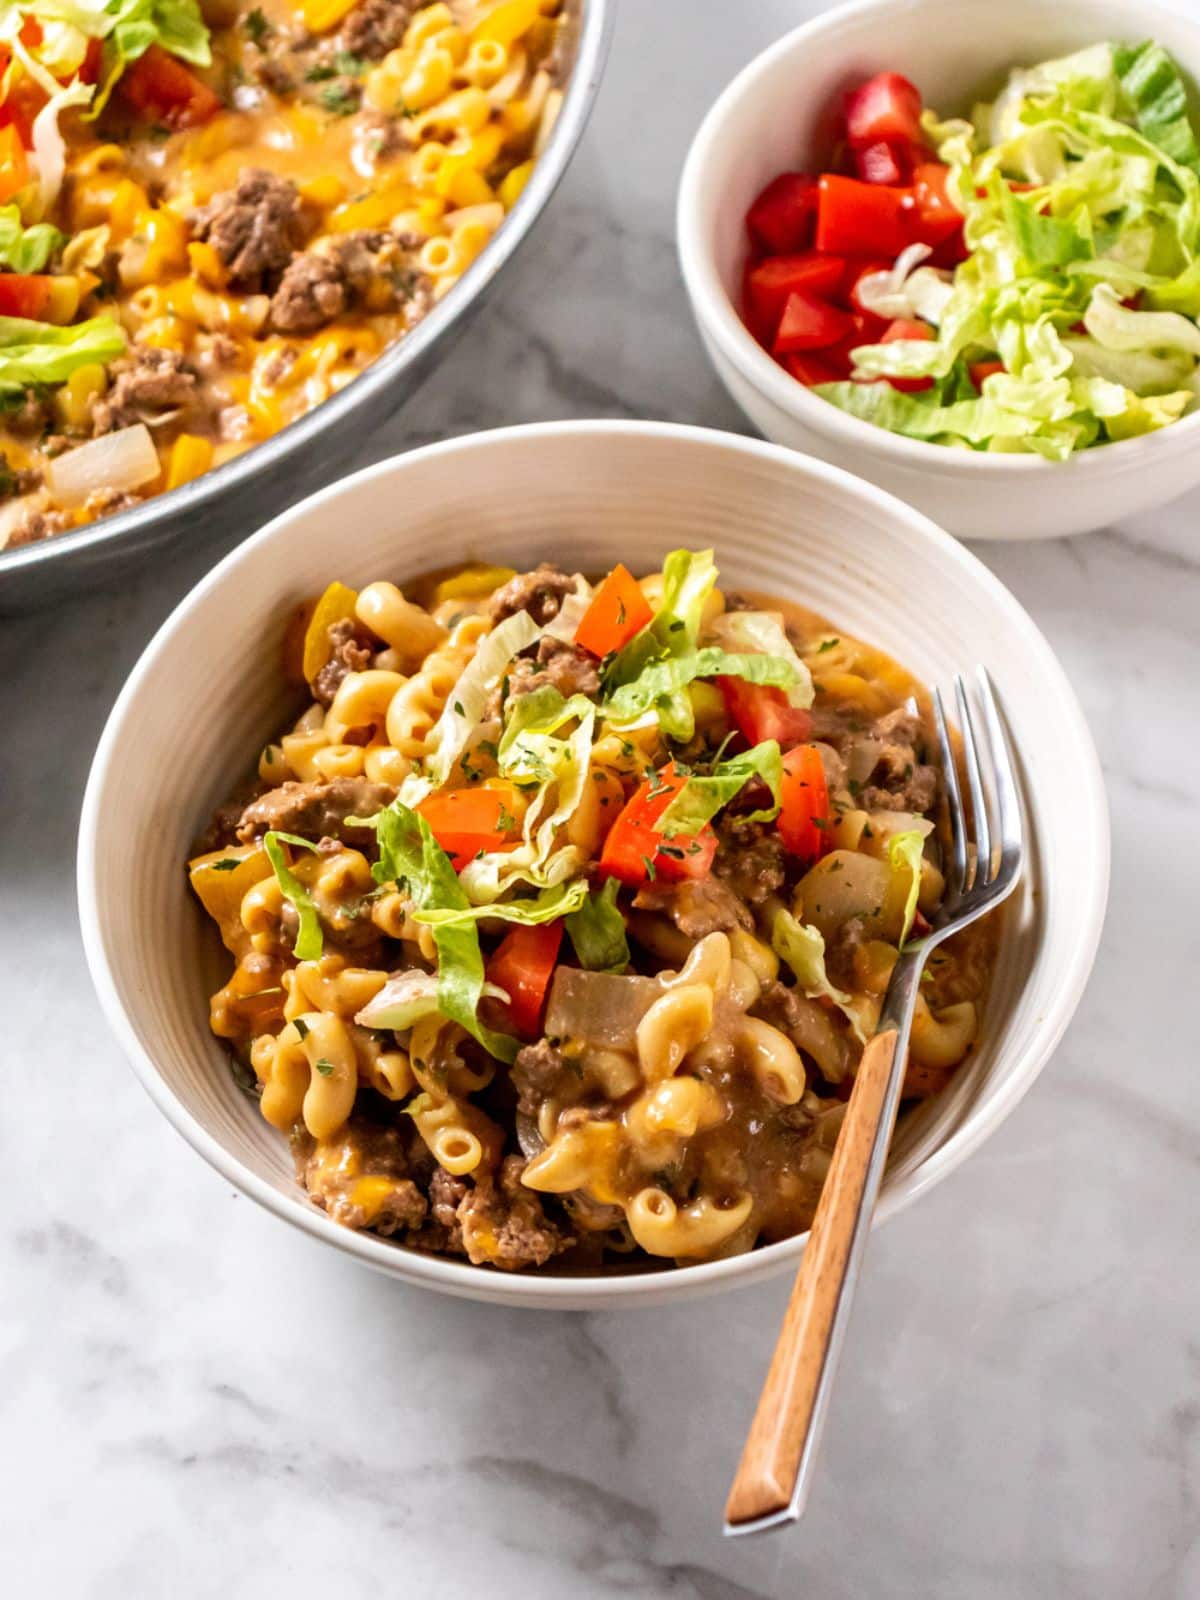 Healthy Cheeseburger Macaroni Skillet is a simple low calorie dinner made with lean beef, macaroni, cheese and packed with the flavors of a cheeseburger while being lighter in calories.